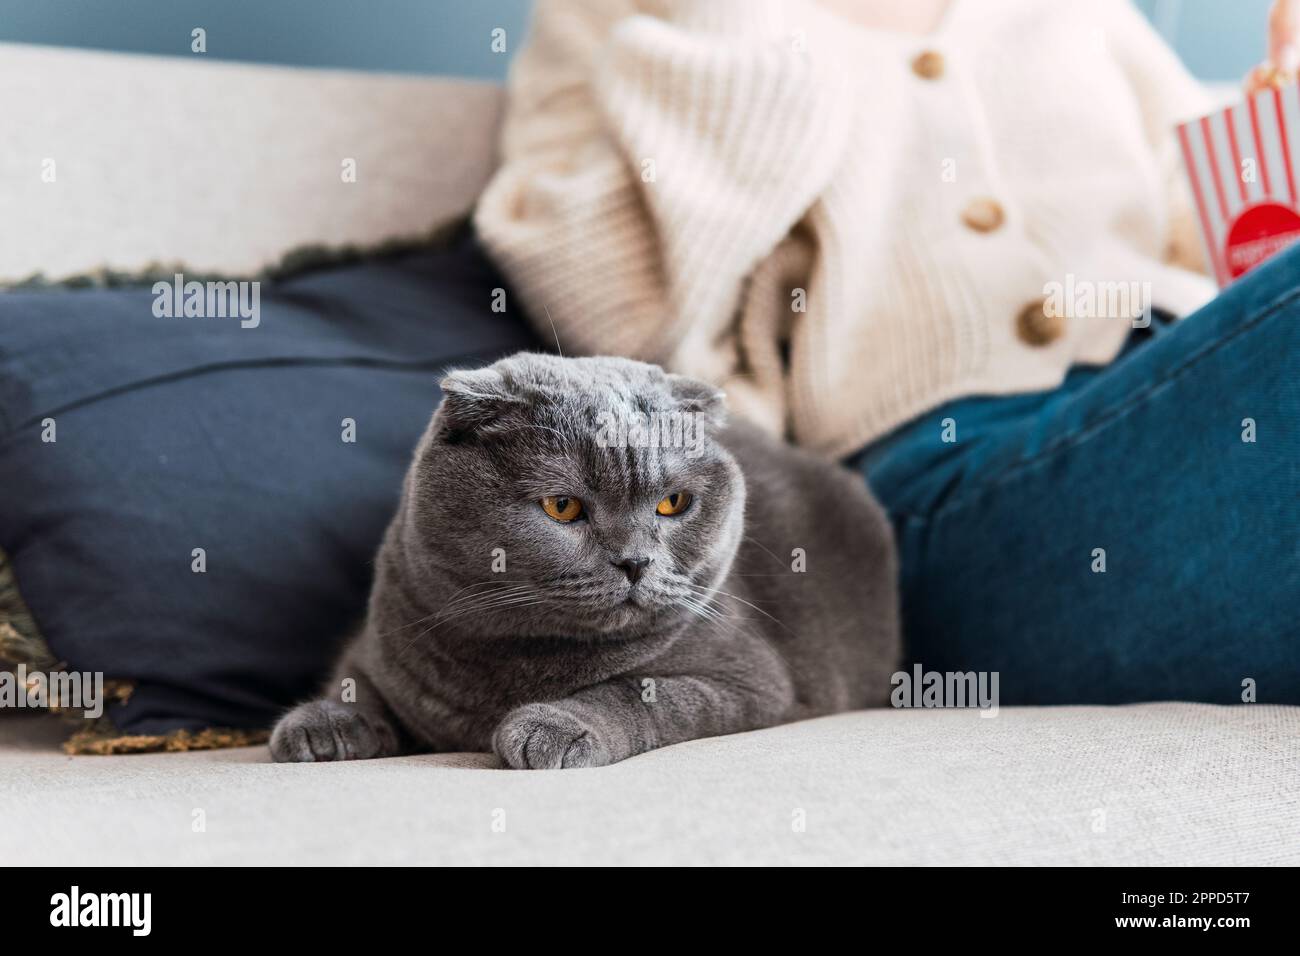 Gray cat with woman sitting on sofa in background Stock Photo